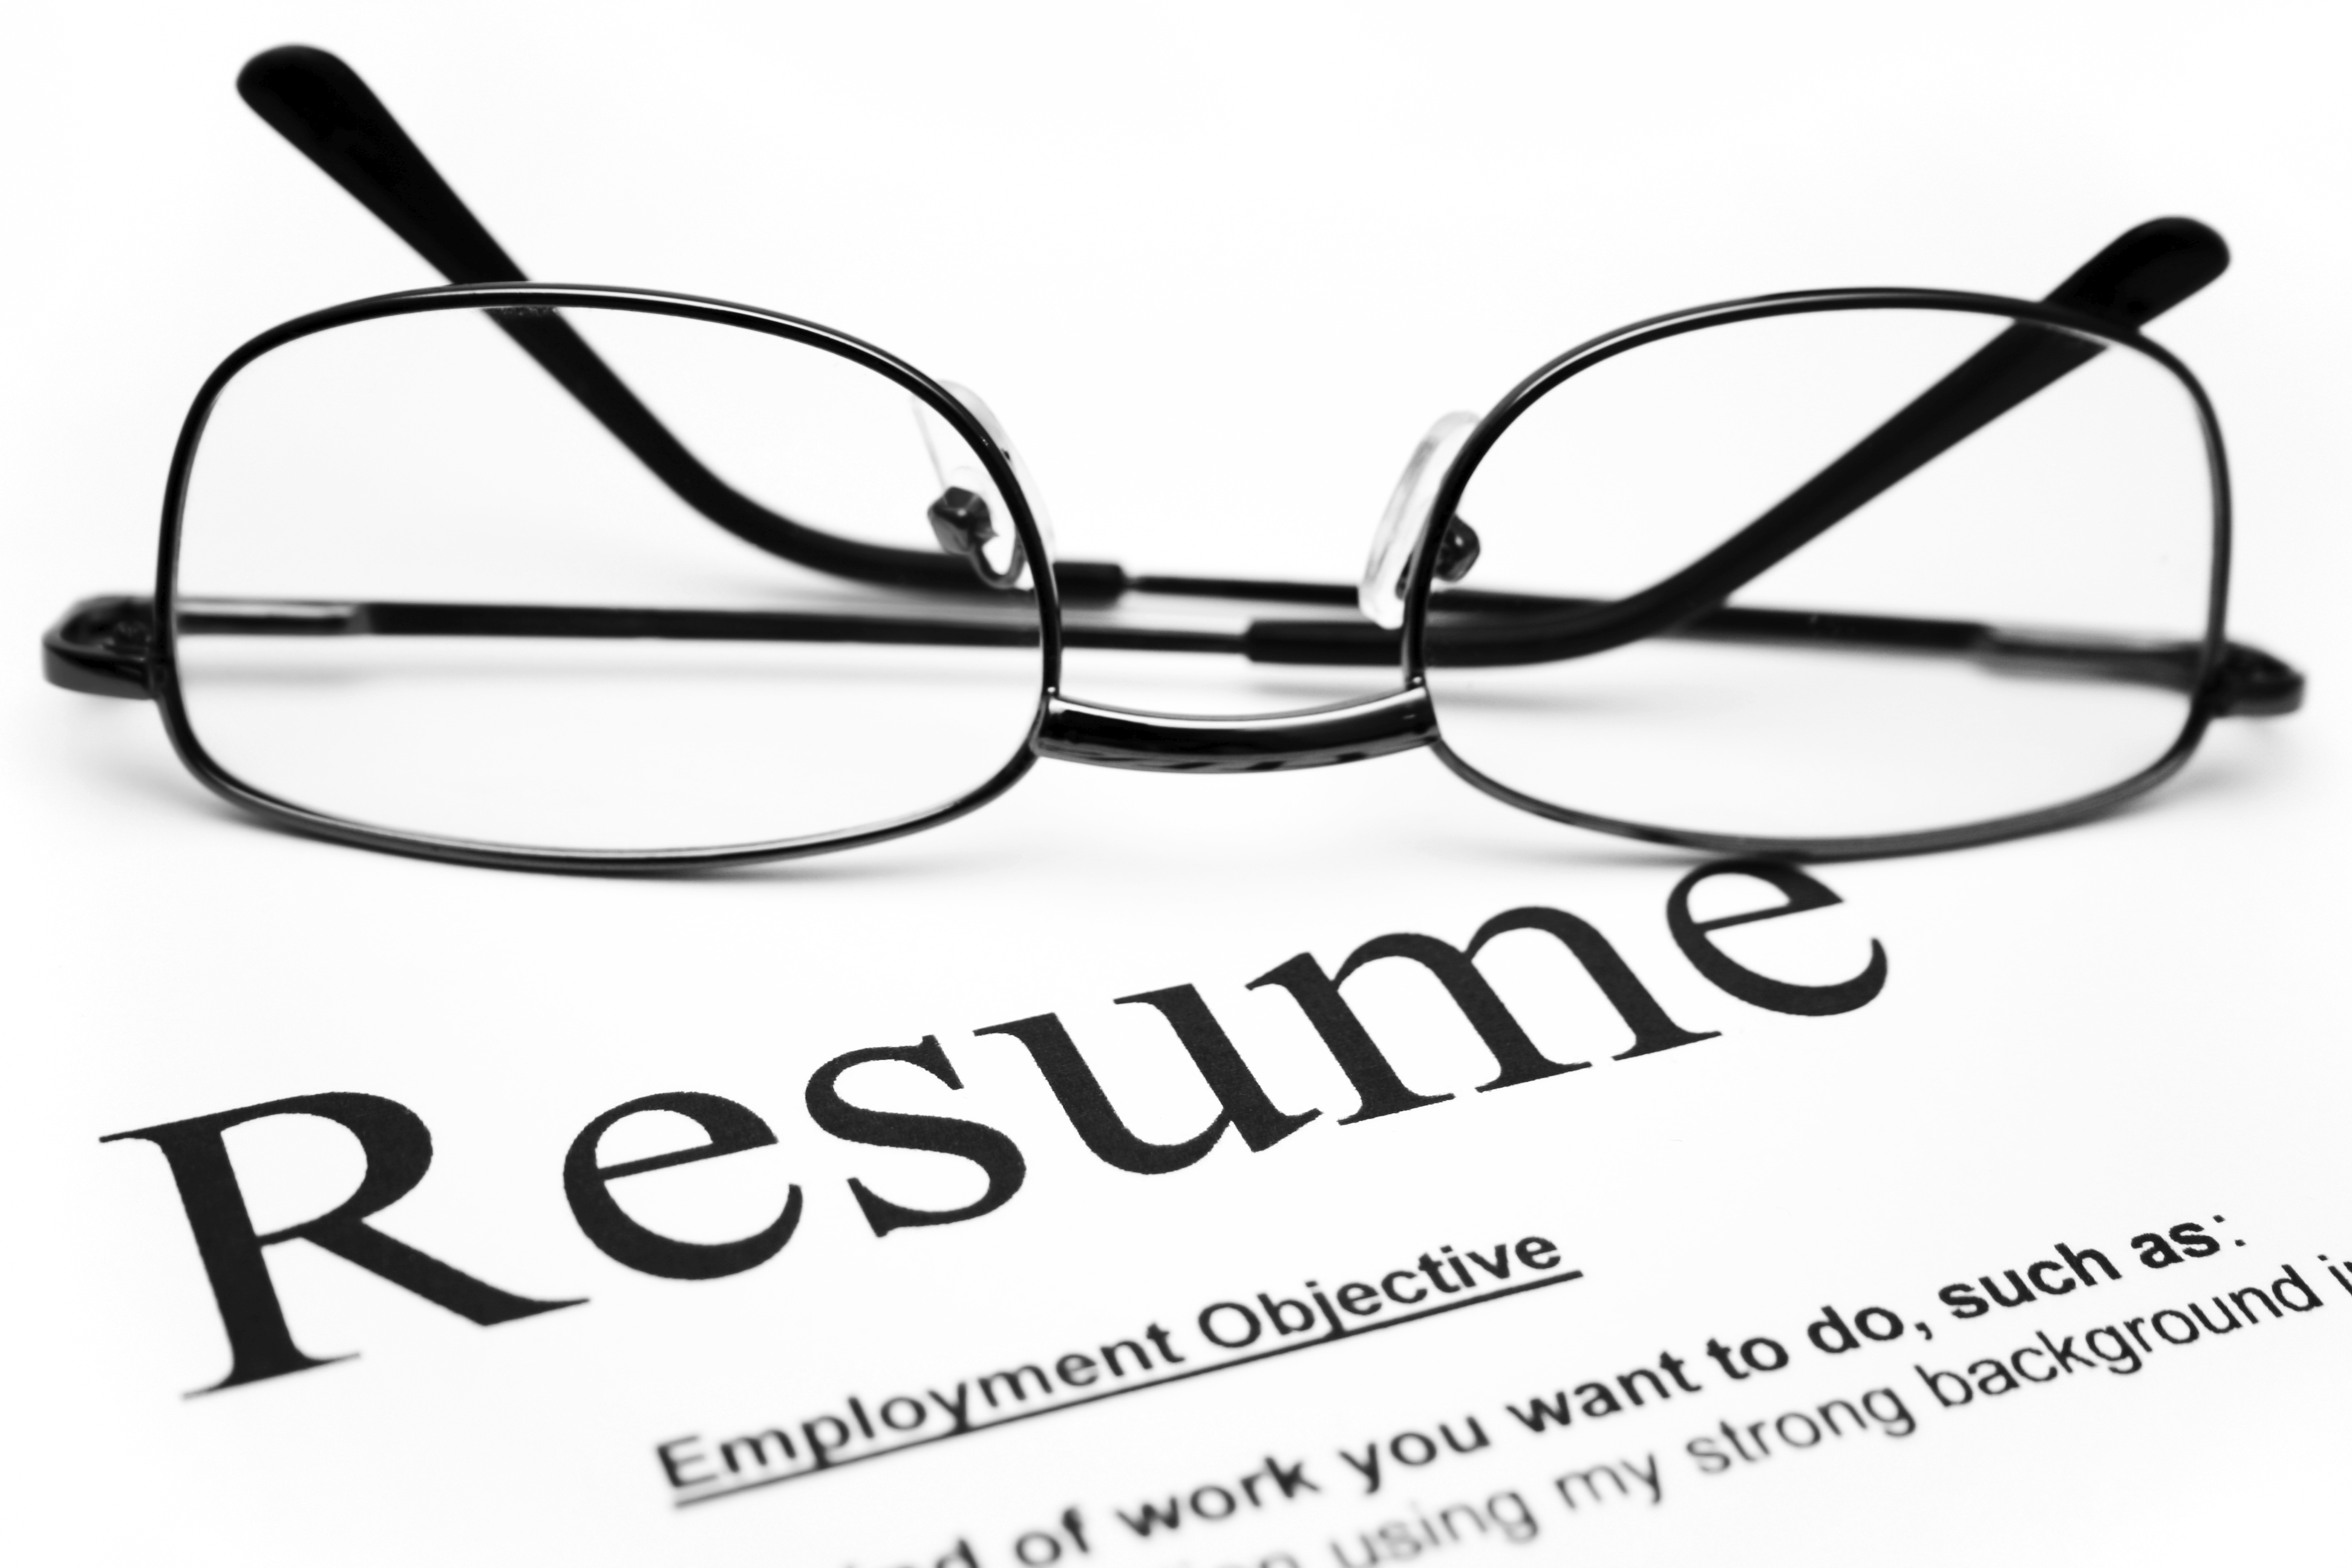 Resume and glasses